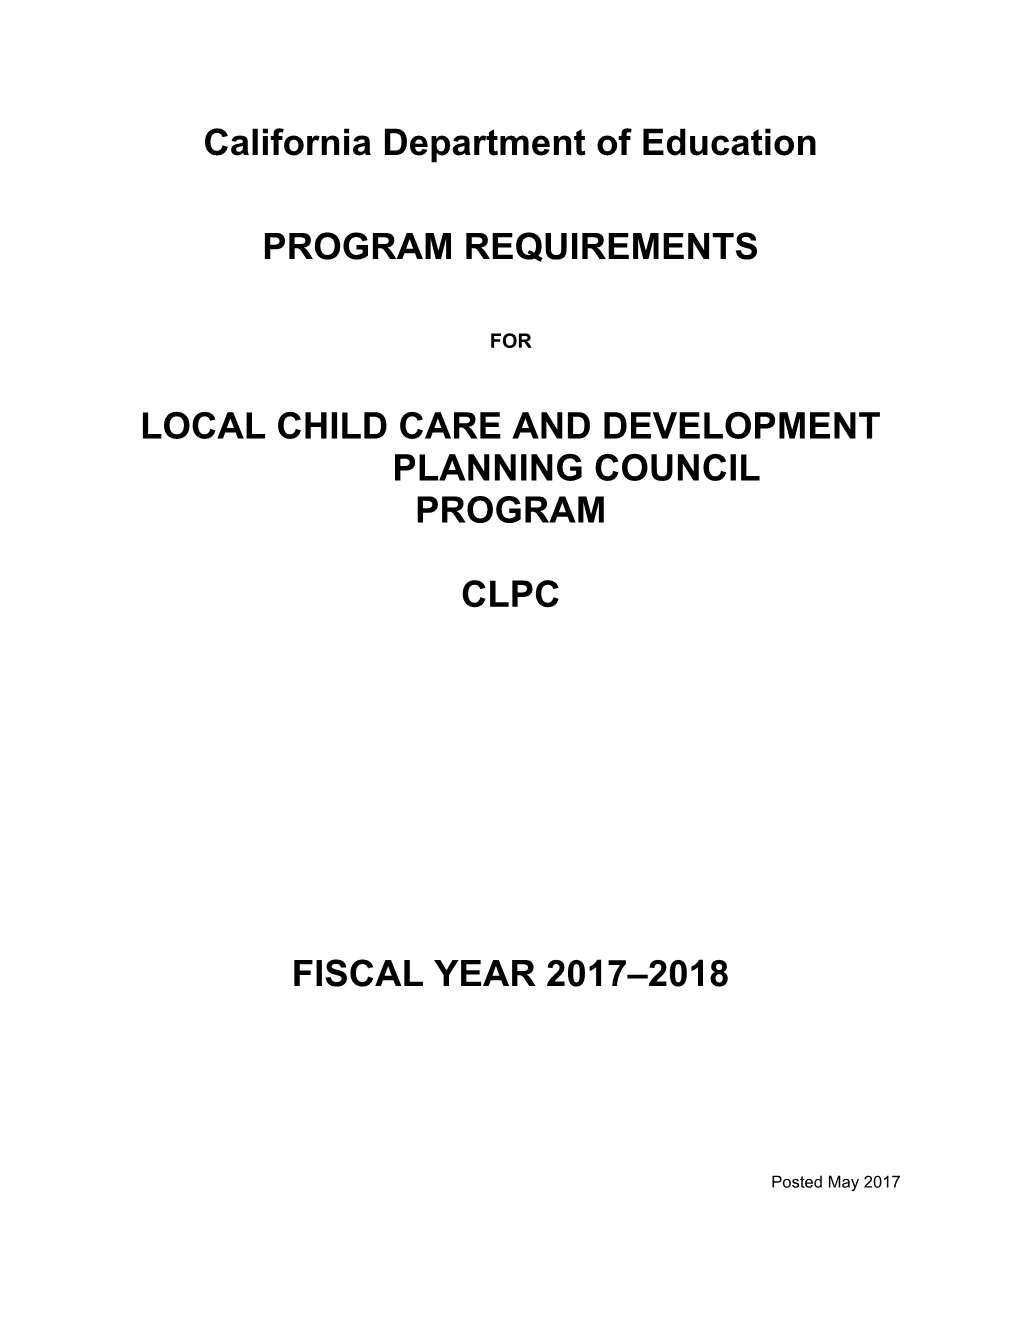 2017-18 Local Child Care Planning Council - Child Development (CA Dept of Education)